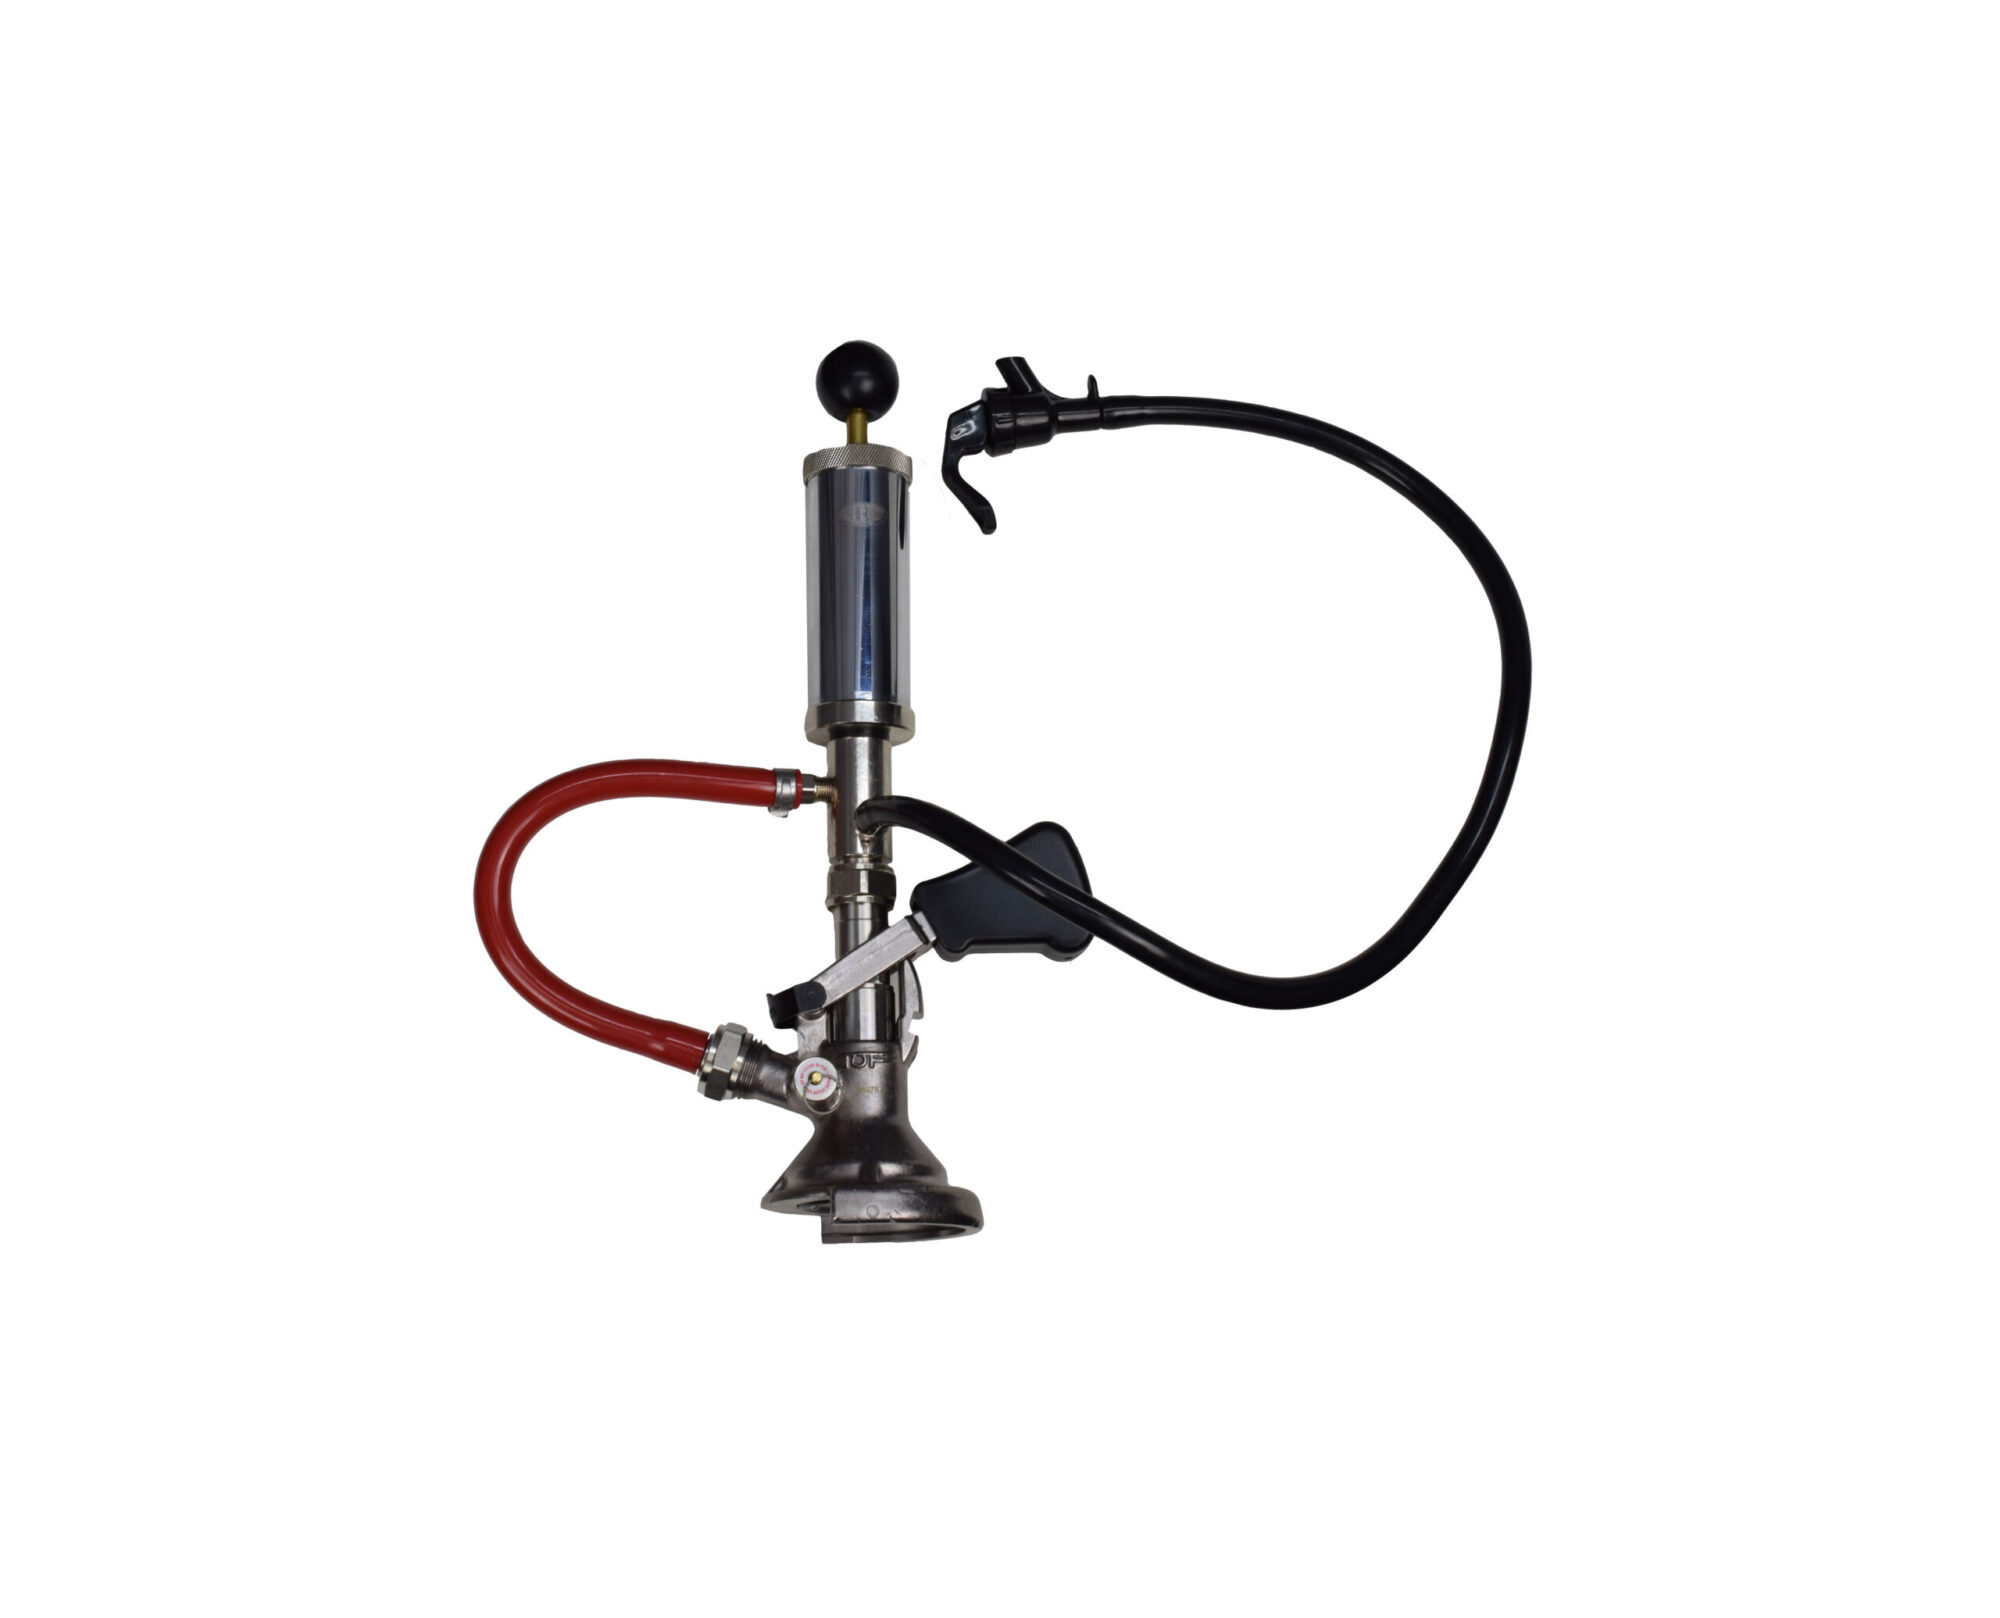 754SA Economy Picnic Pump with 4" Pump, 2' Hose and Plastic Faucet - "A" System